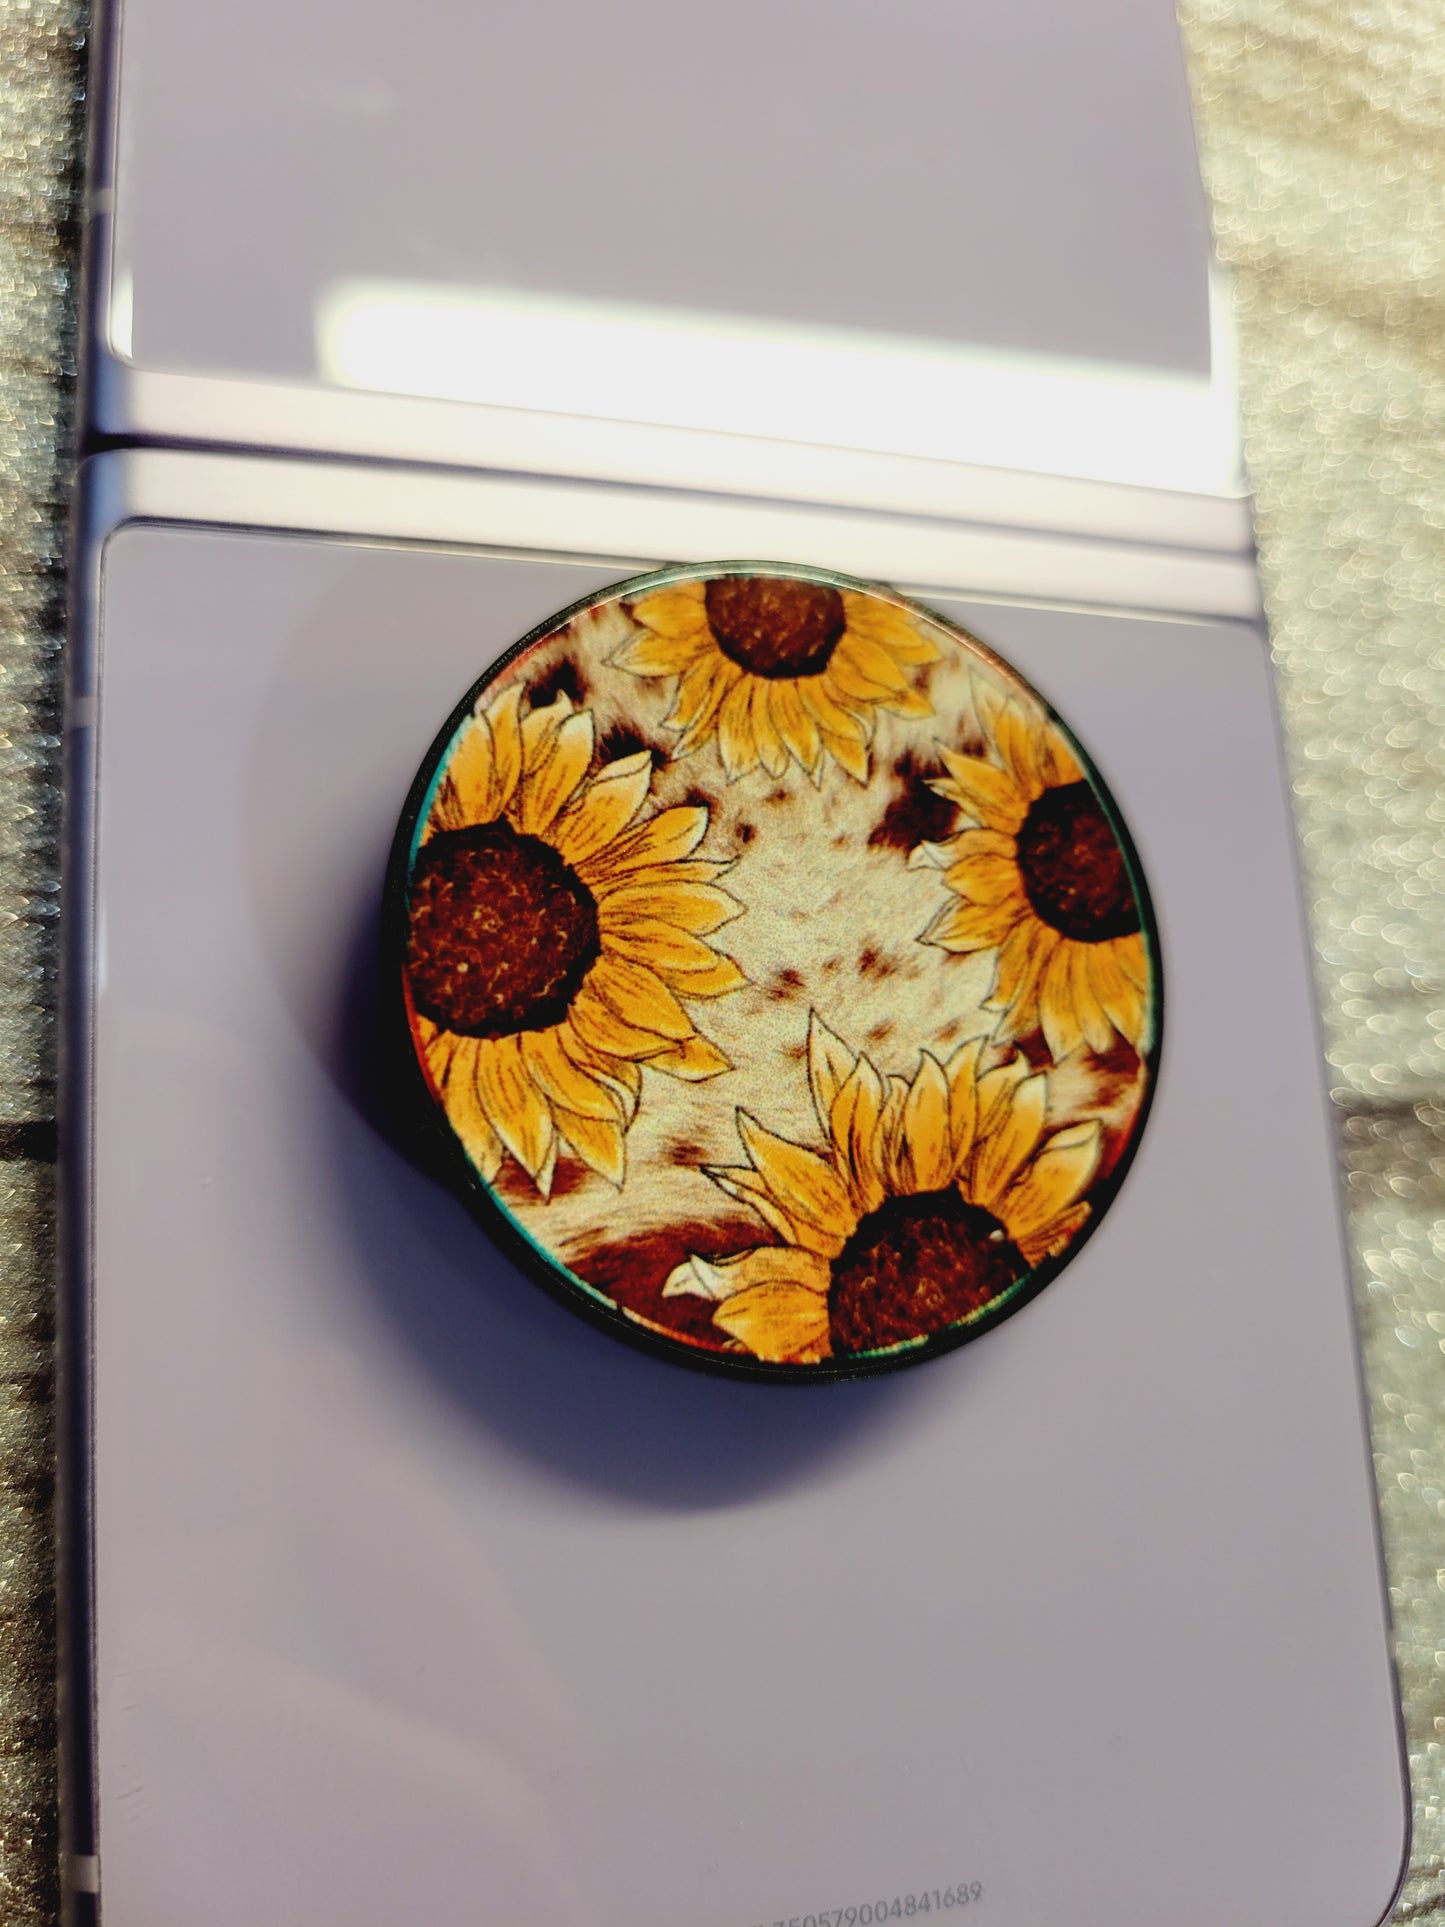 Sunflowers and Cowhide Phone Grip